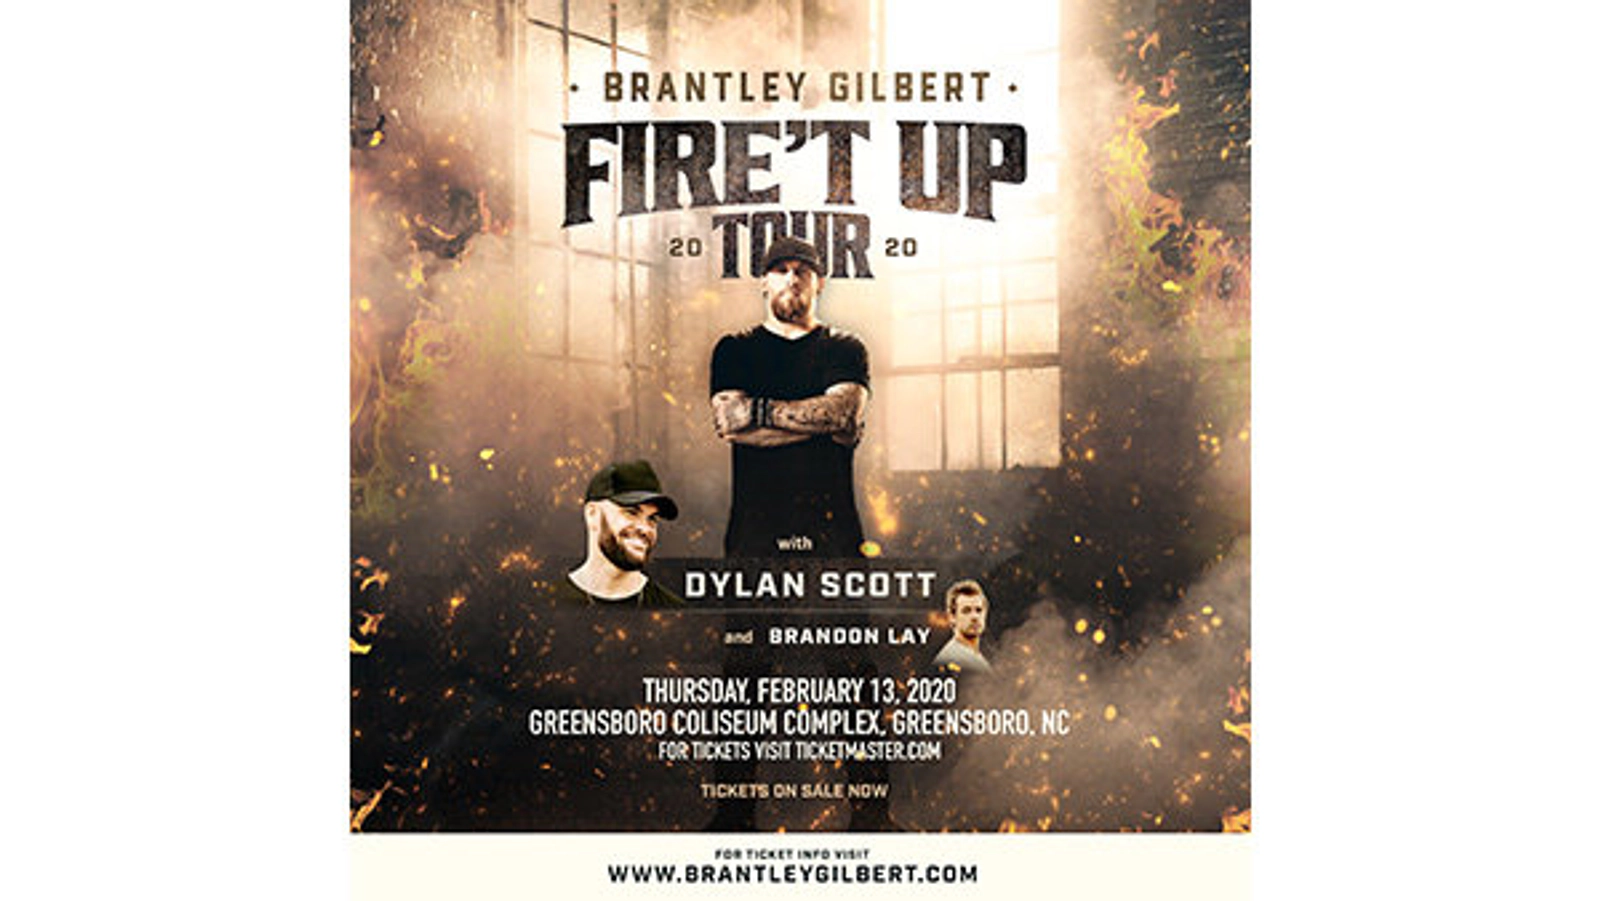 Brantley Gilbert Fire't Up Tour Tickets - Thumbnail Image